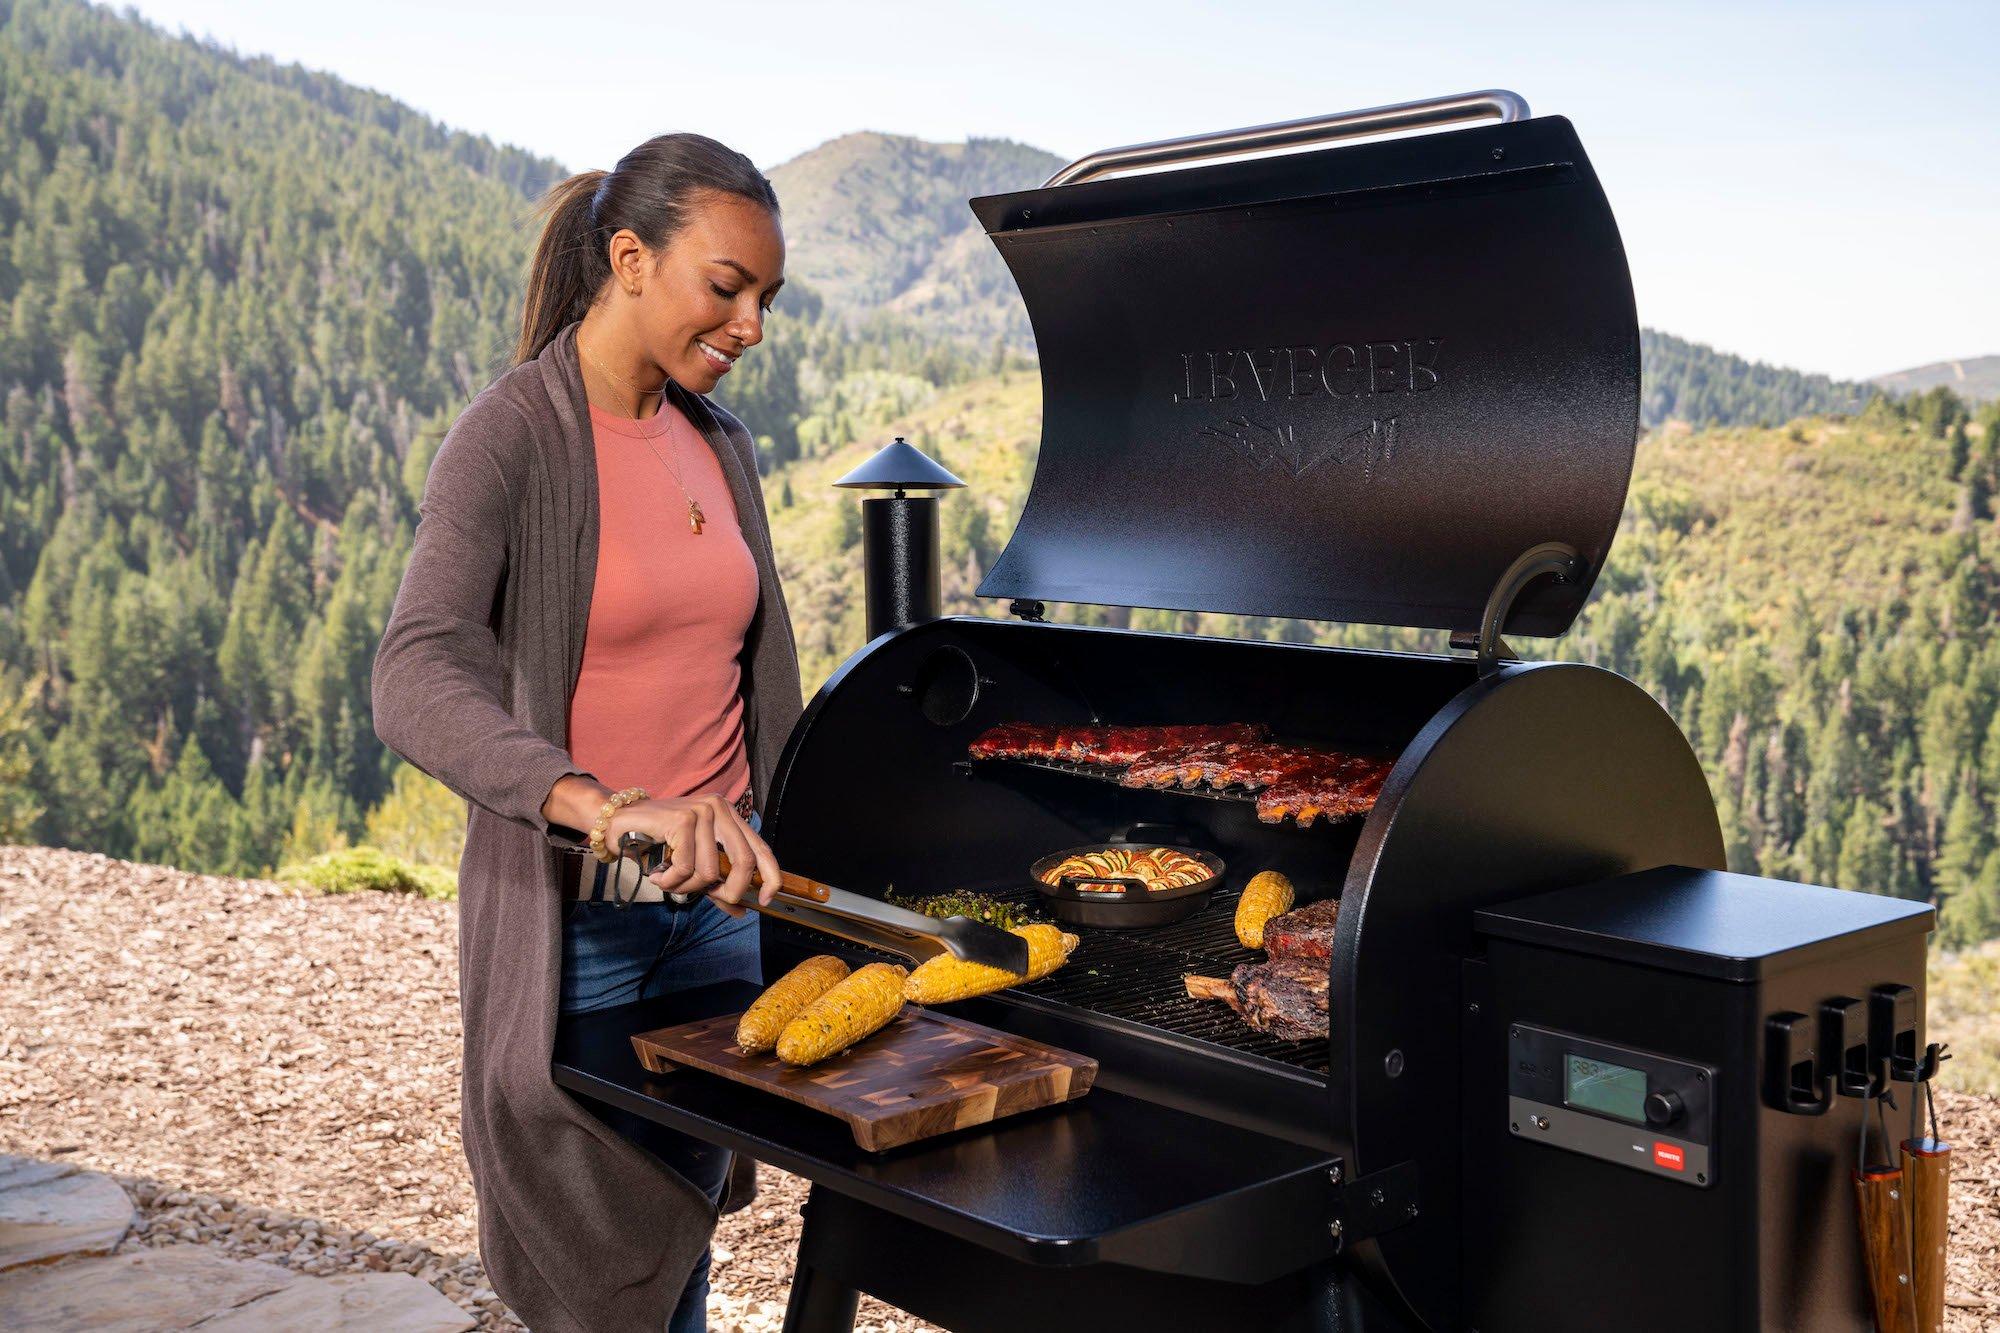 Traeger Pro 780 Black Wood Pellet Grill Lifestyle Cooking Corns and Steaks